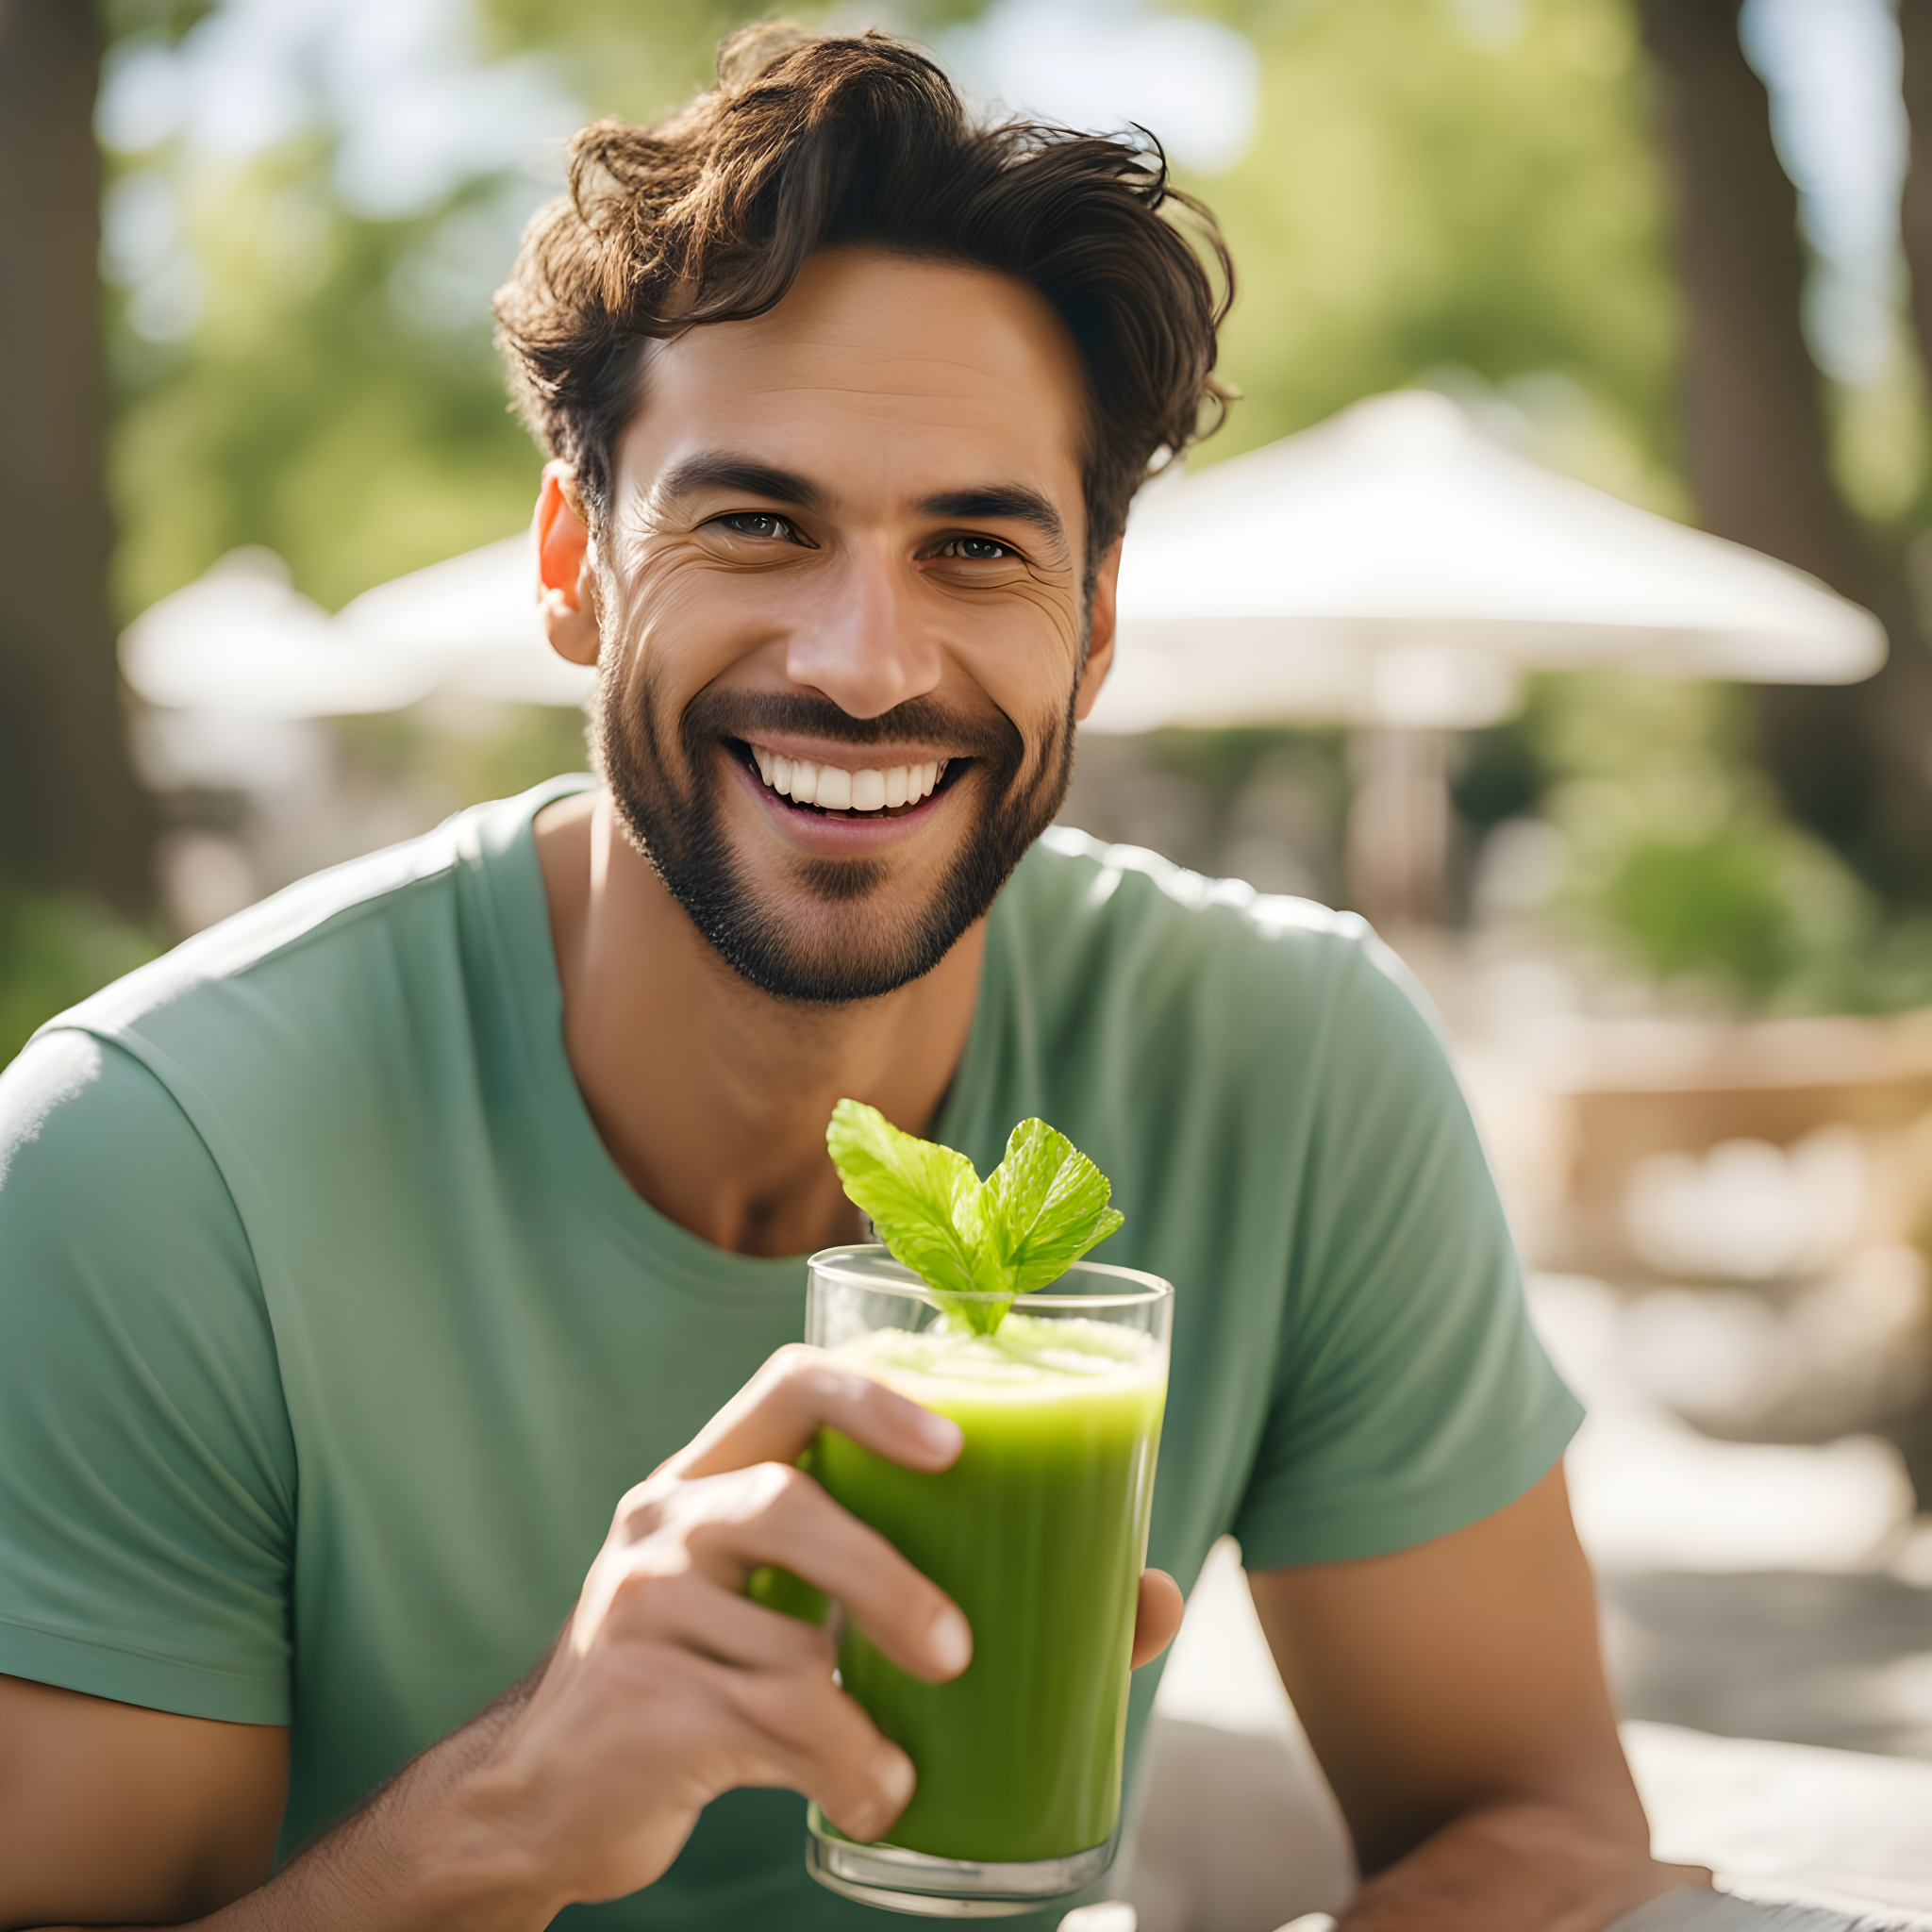 Person with glowing skin holding a glass of green juice